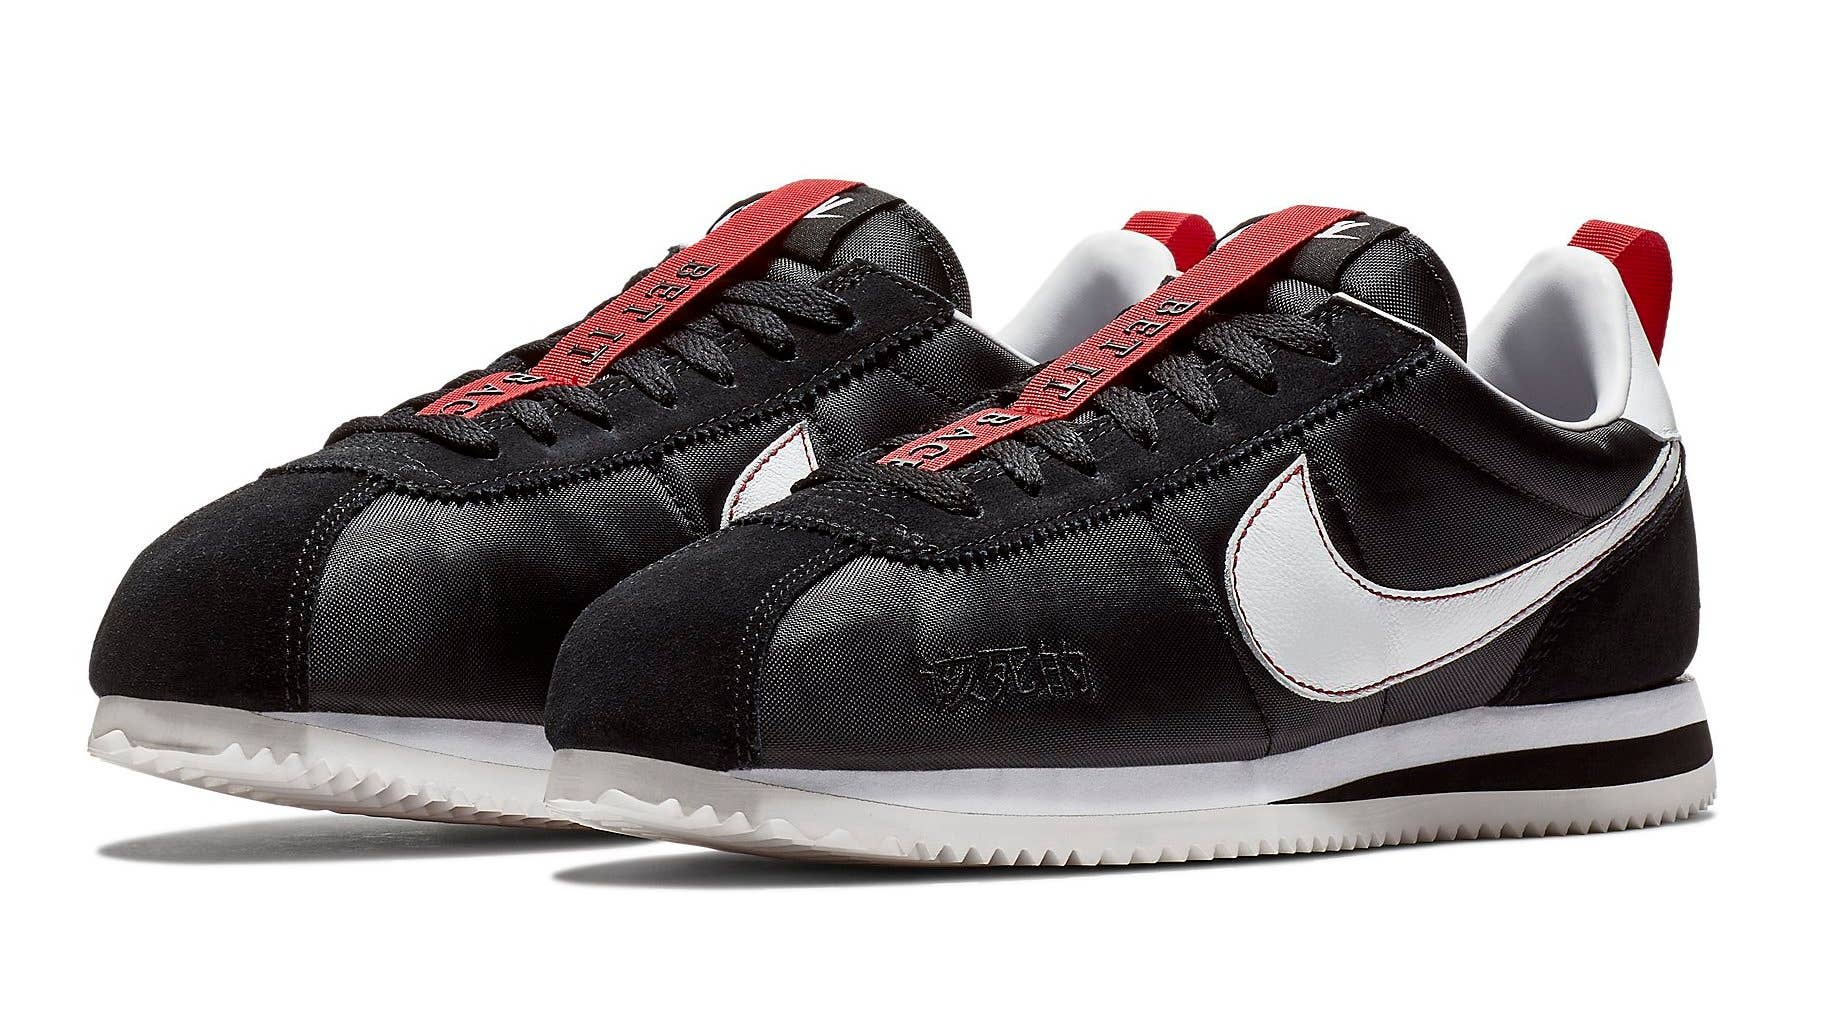 Descenso repentino Mejorar tornado The Nike 'Cortez Kenny III' Is Finally Dropping On SNKRS | Complex